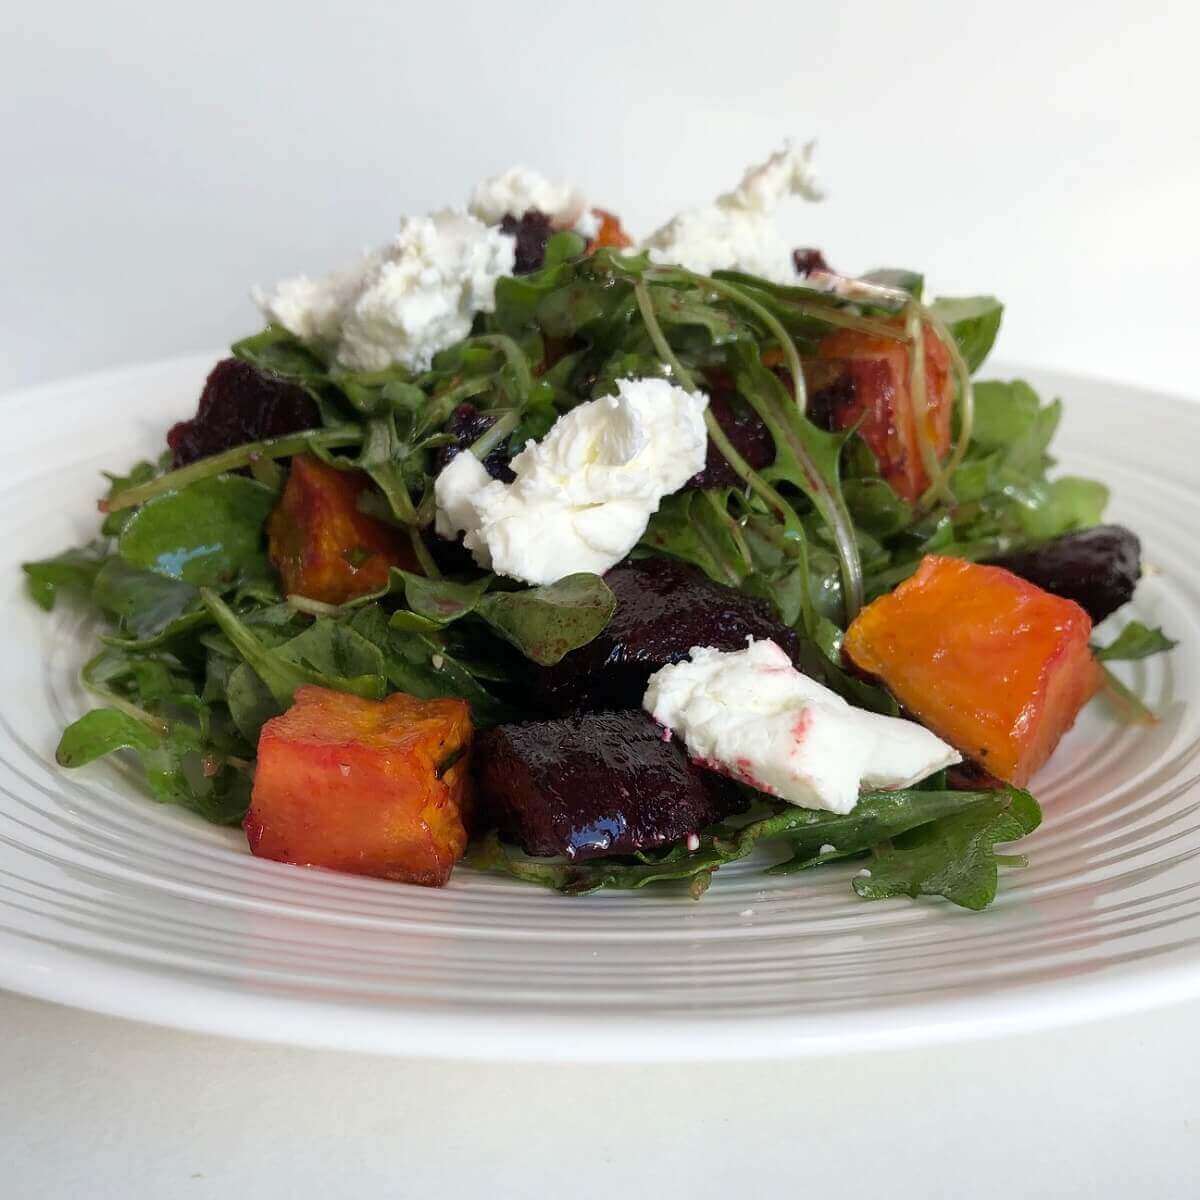 Sweet potato and beet salad piled on a white plate.